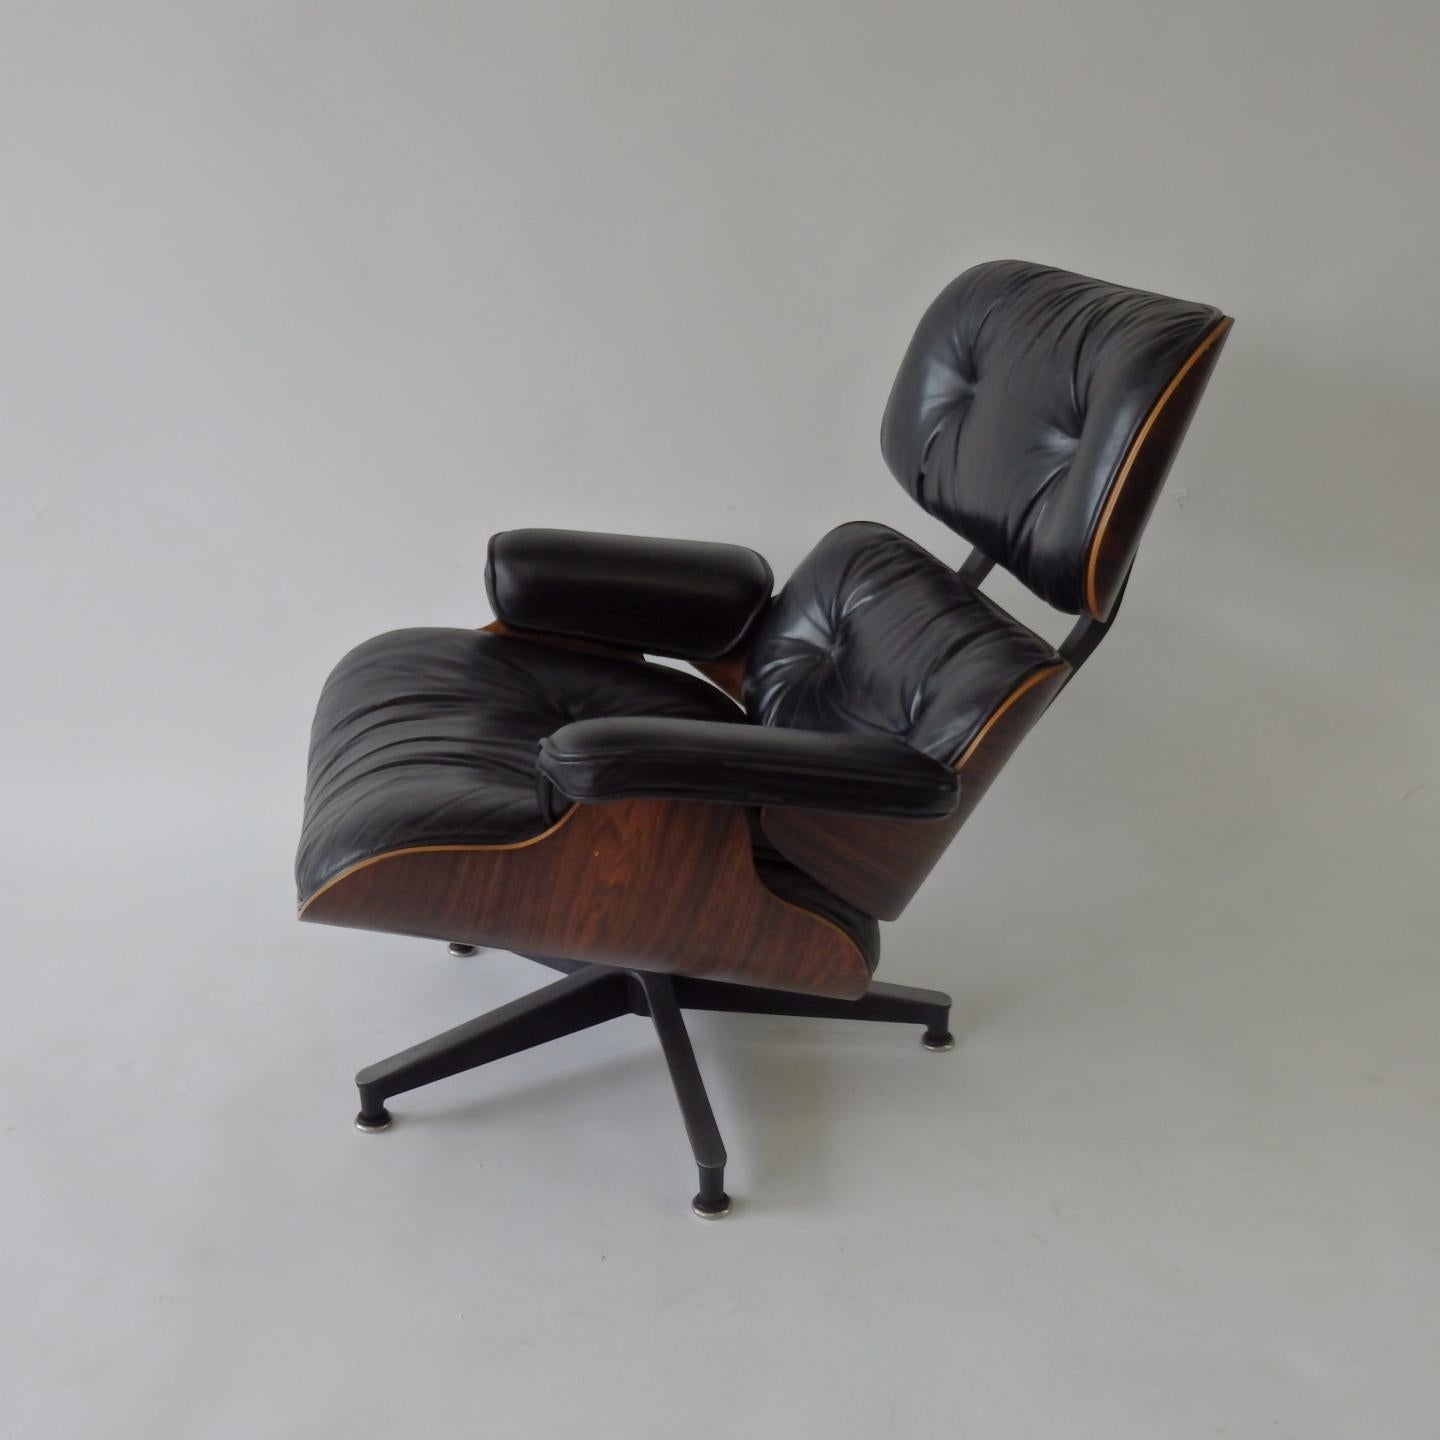 One Owner Estate Charles and Ray Eames Black Leather Lounge Chair with Ottoman 2